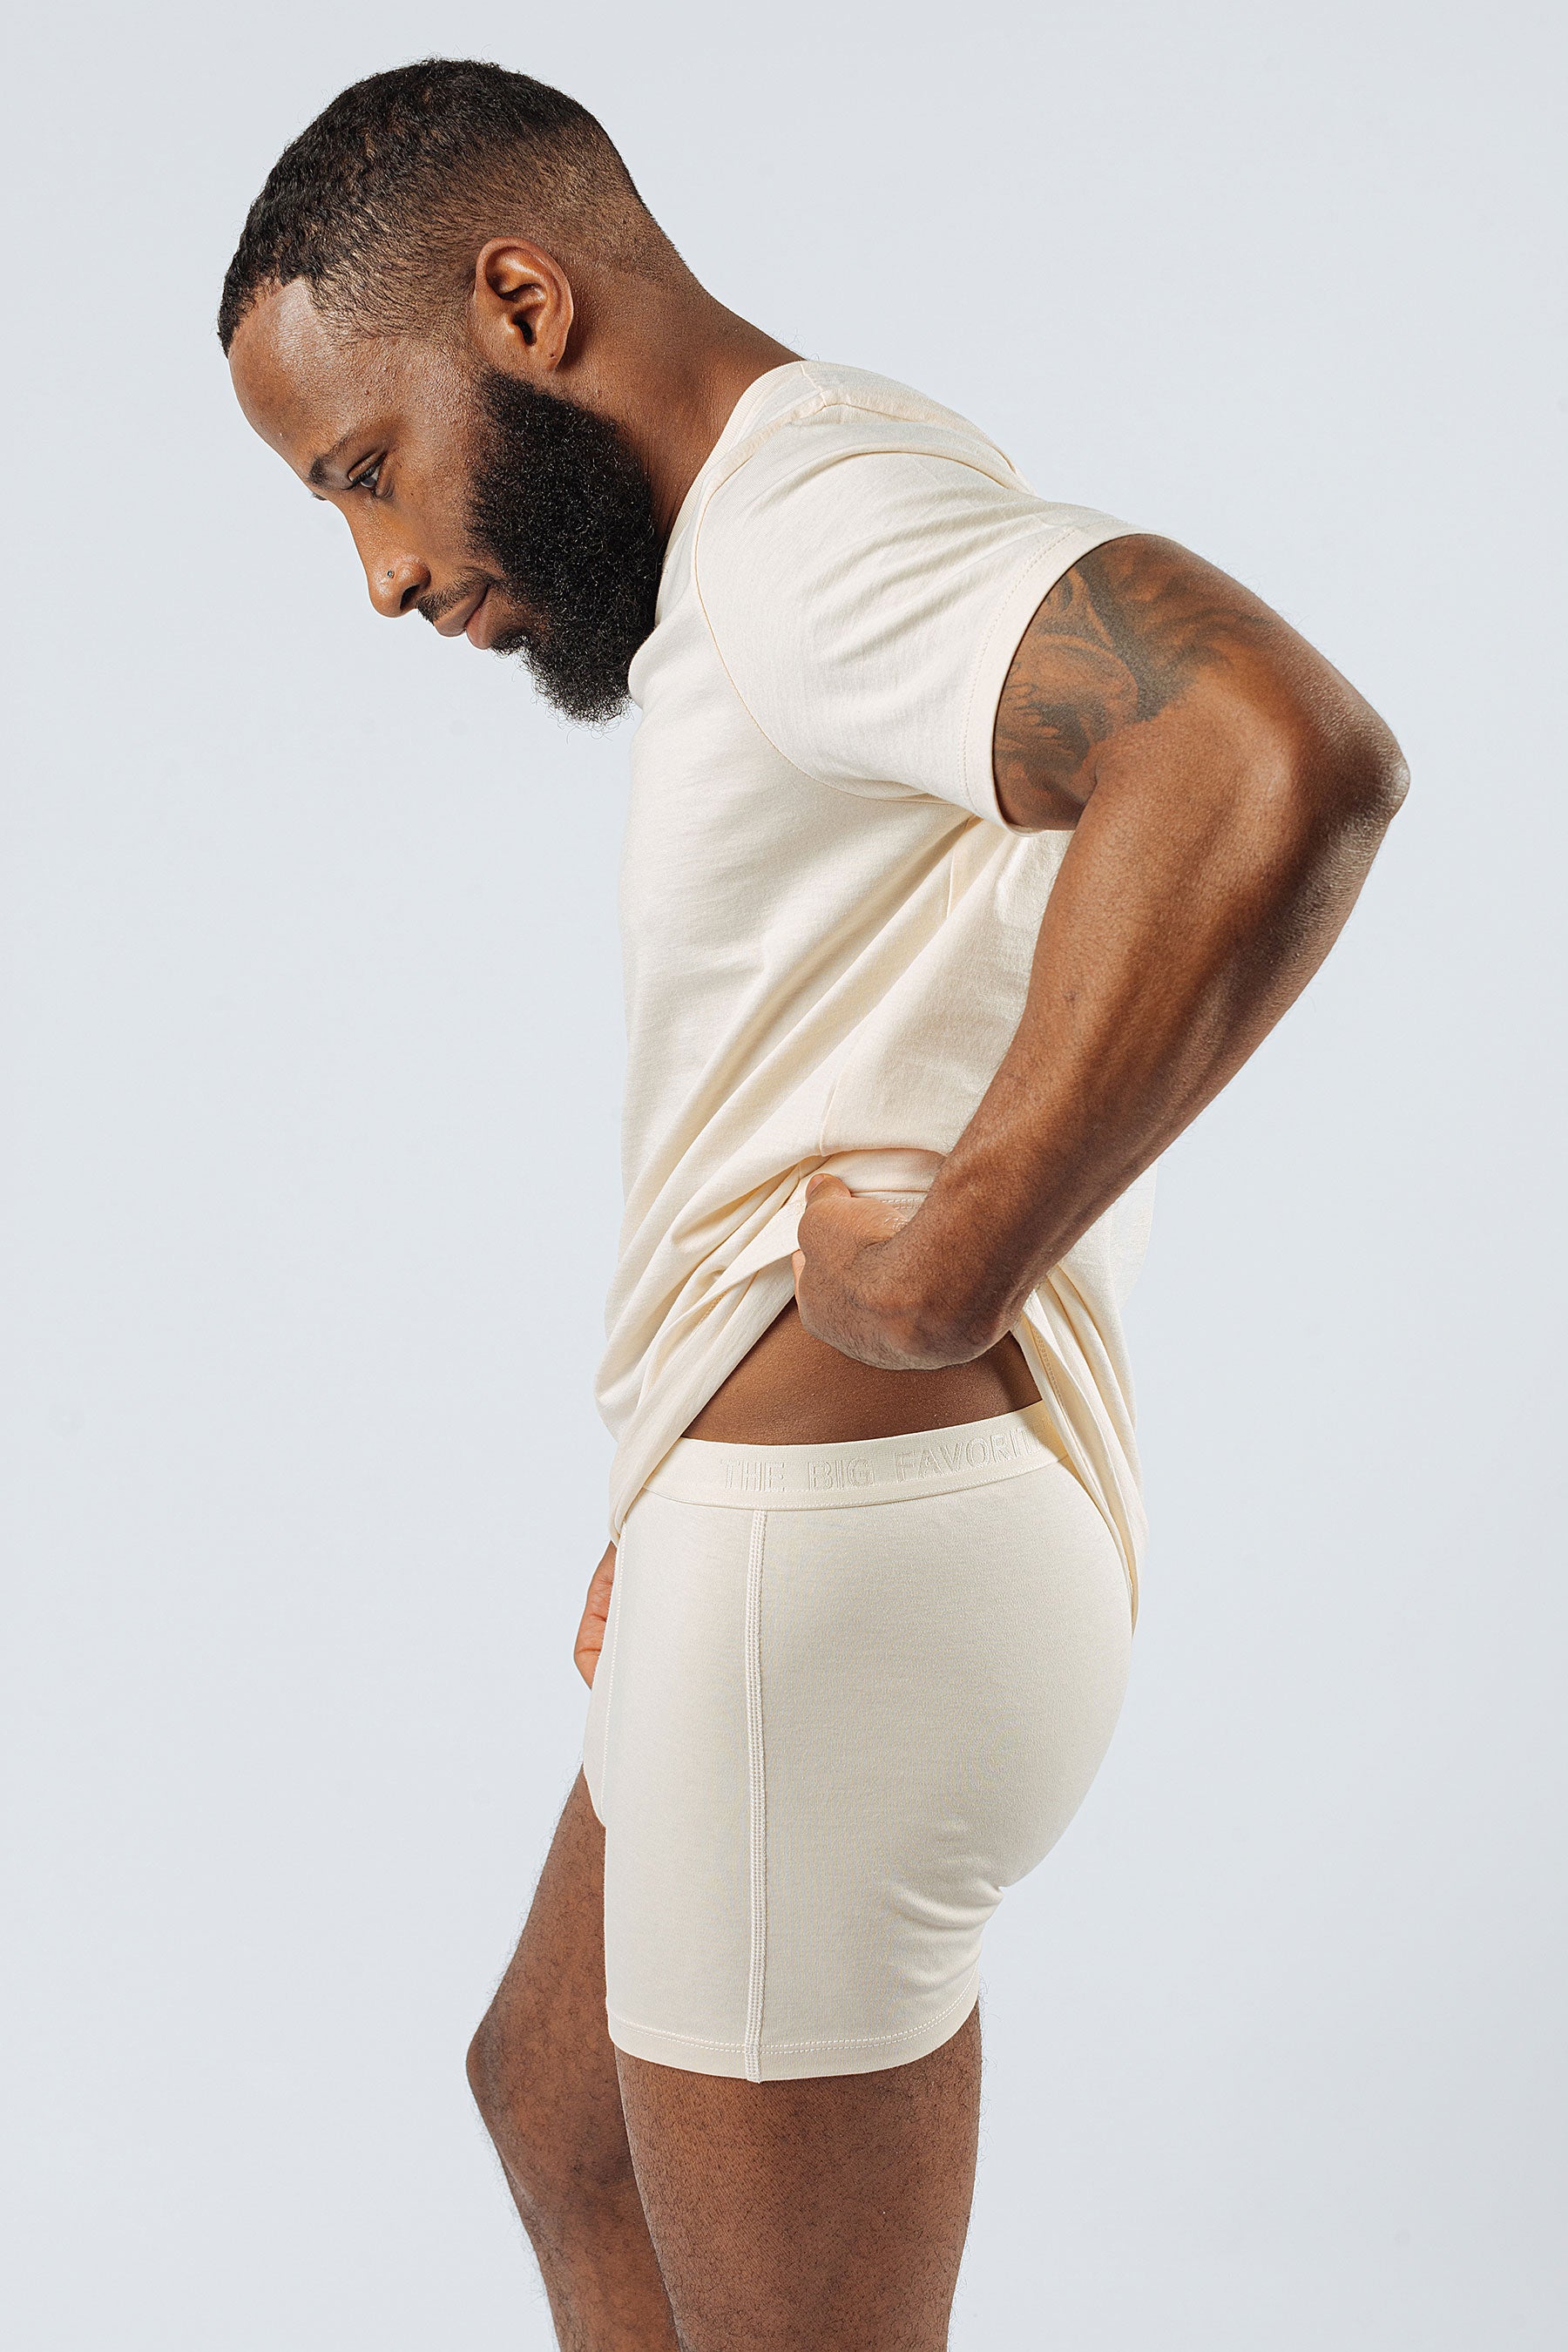 Forget custom boxers: 10 Reasons Why You No Longer Need It by